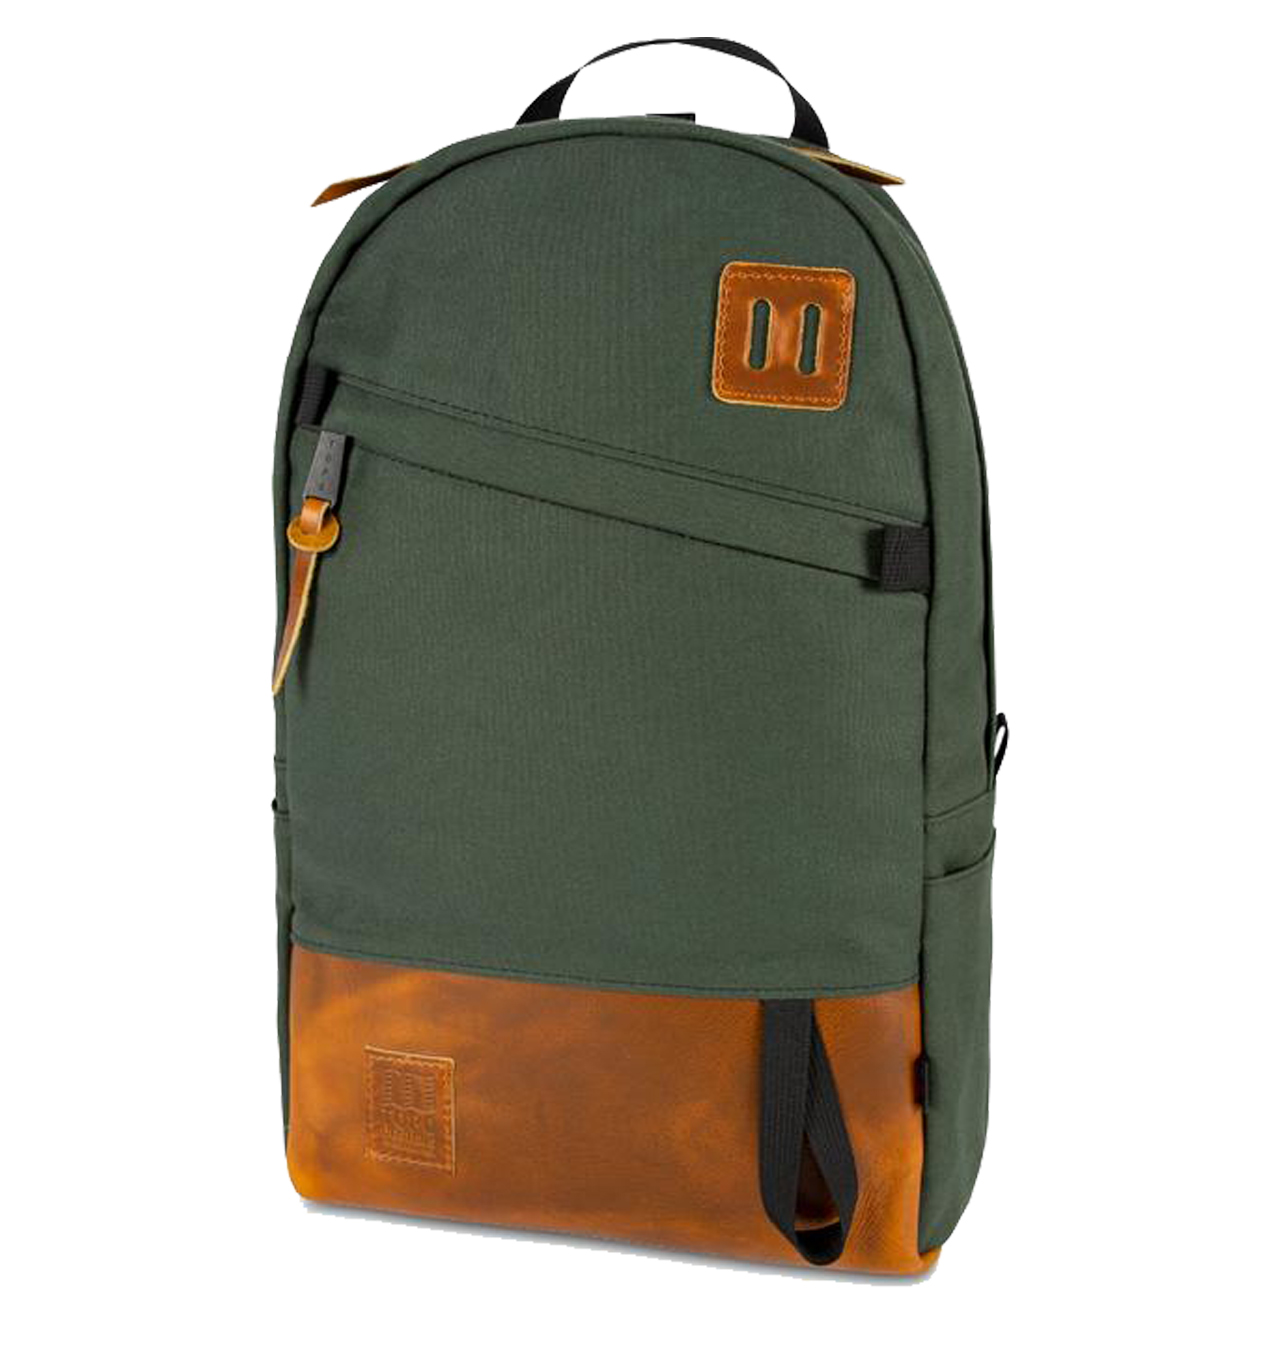 TOPO Designs - Daypack Heritage Canvas - Olive Canvas/Brown Leather